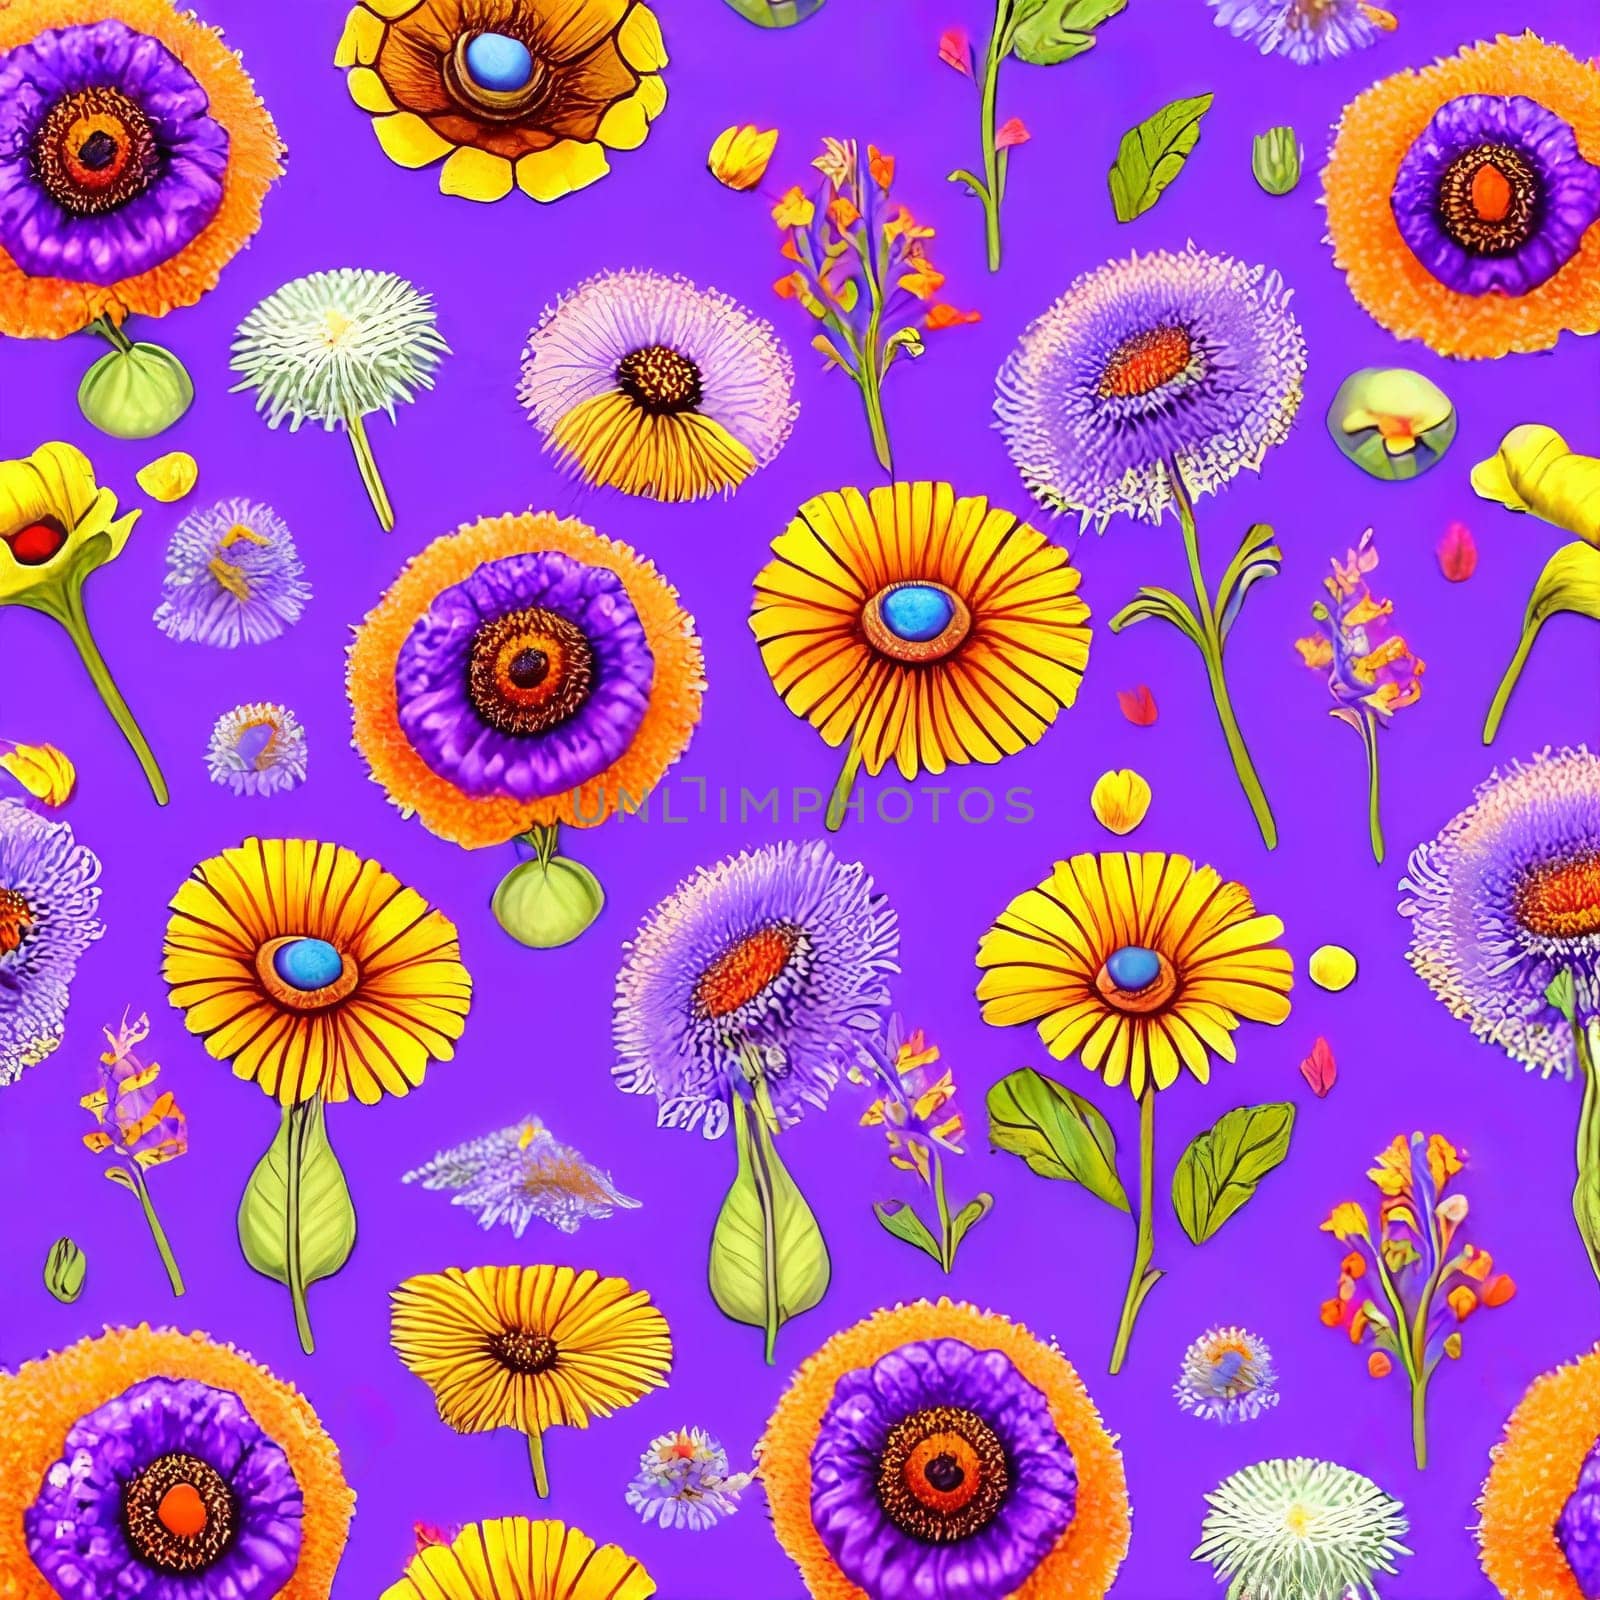 Whimsical and enchanting background using a blend of wildflowers such as dandelions, lavender, and poppies. Panorama